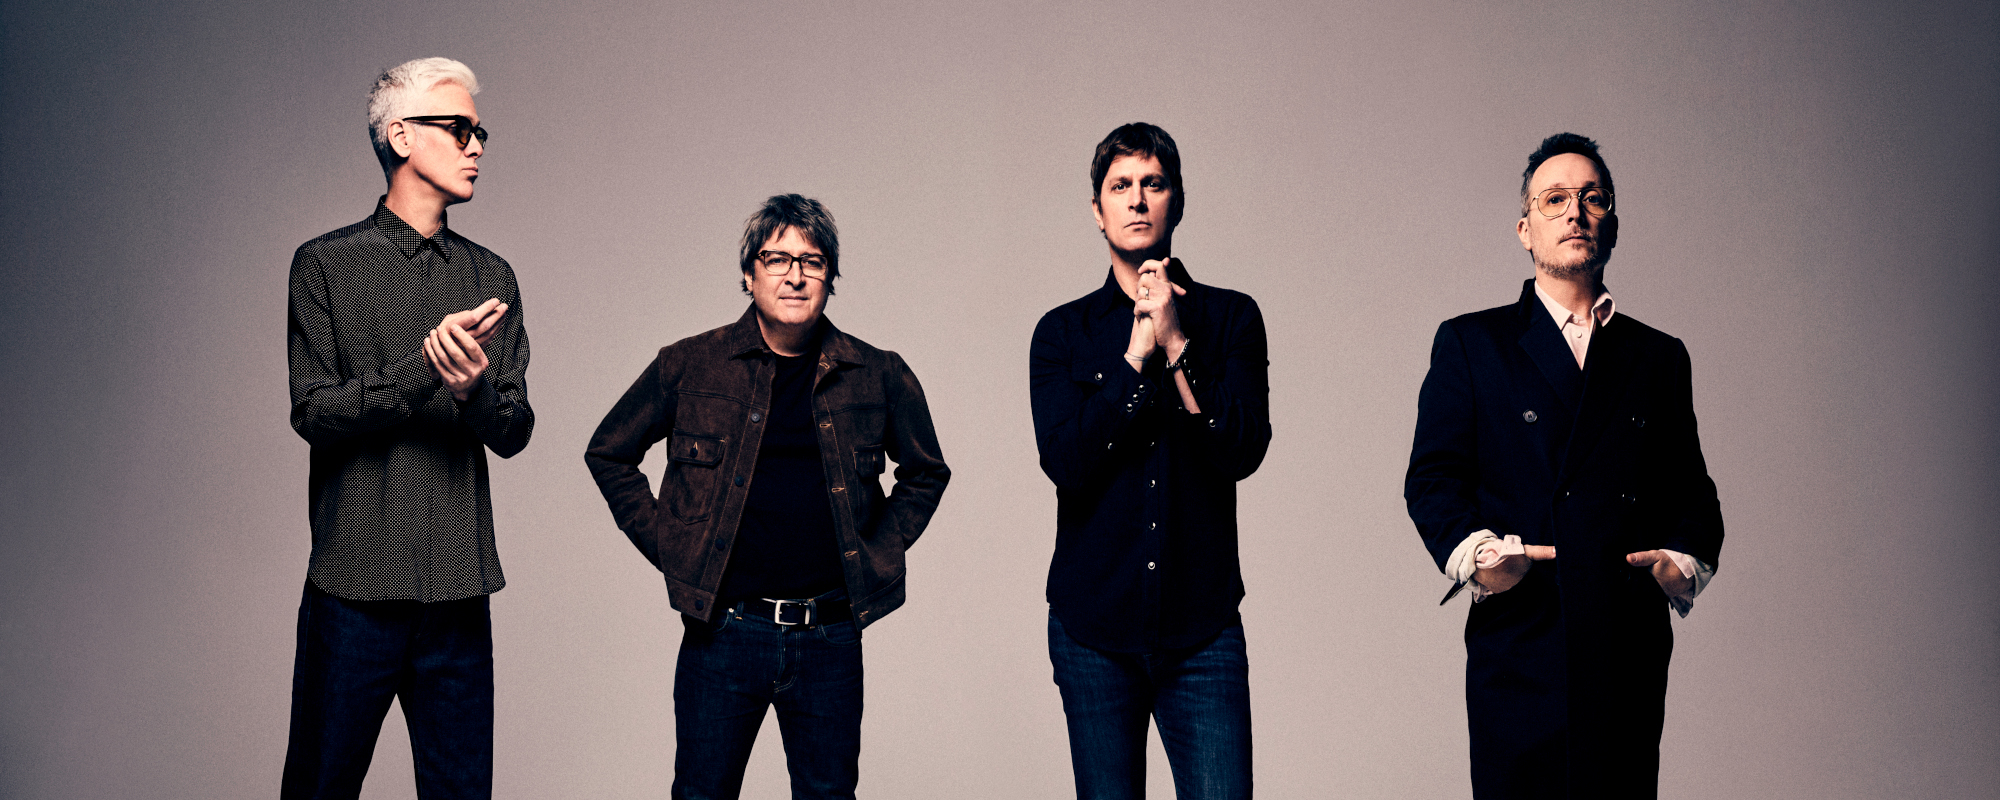 Matchbox Twenty Releases “Don’t Get Me Wrong” from Forthcoming Album; Announces 50+ Date Tour